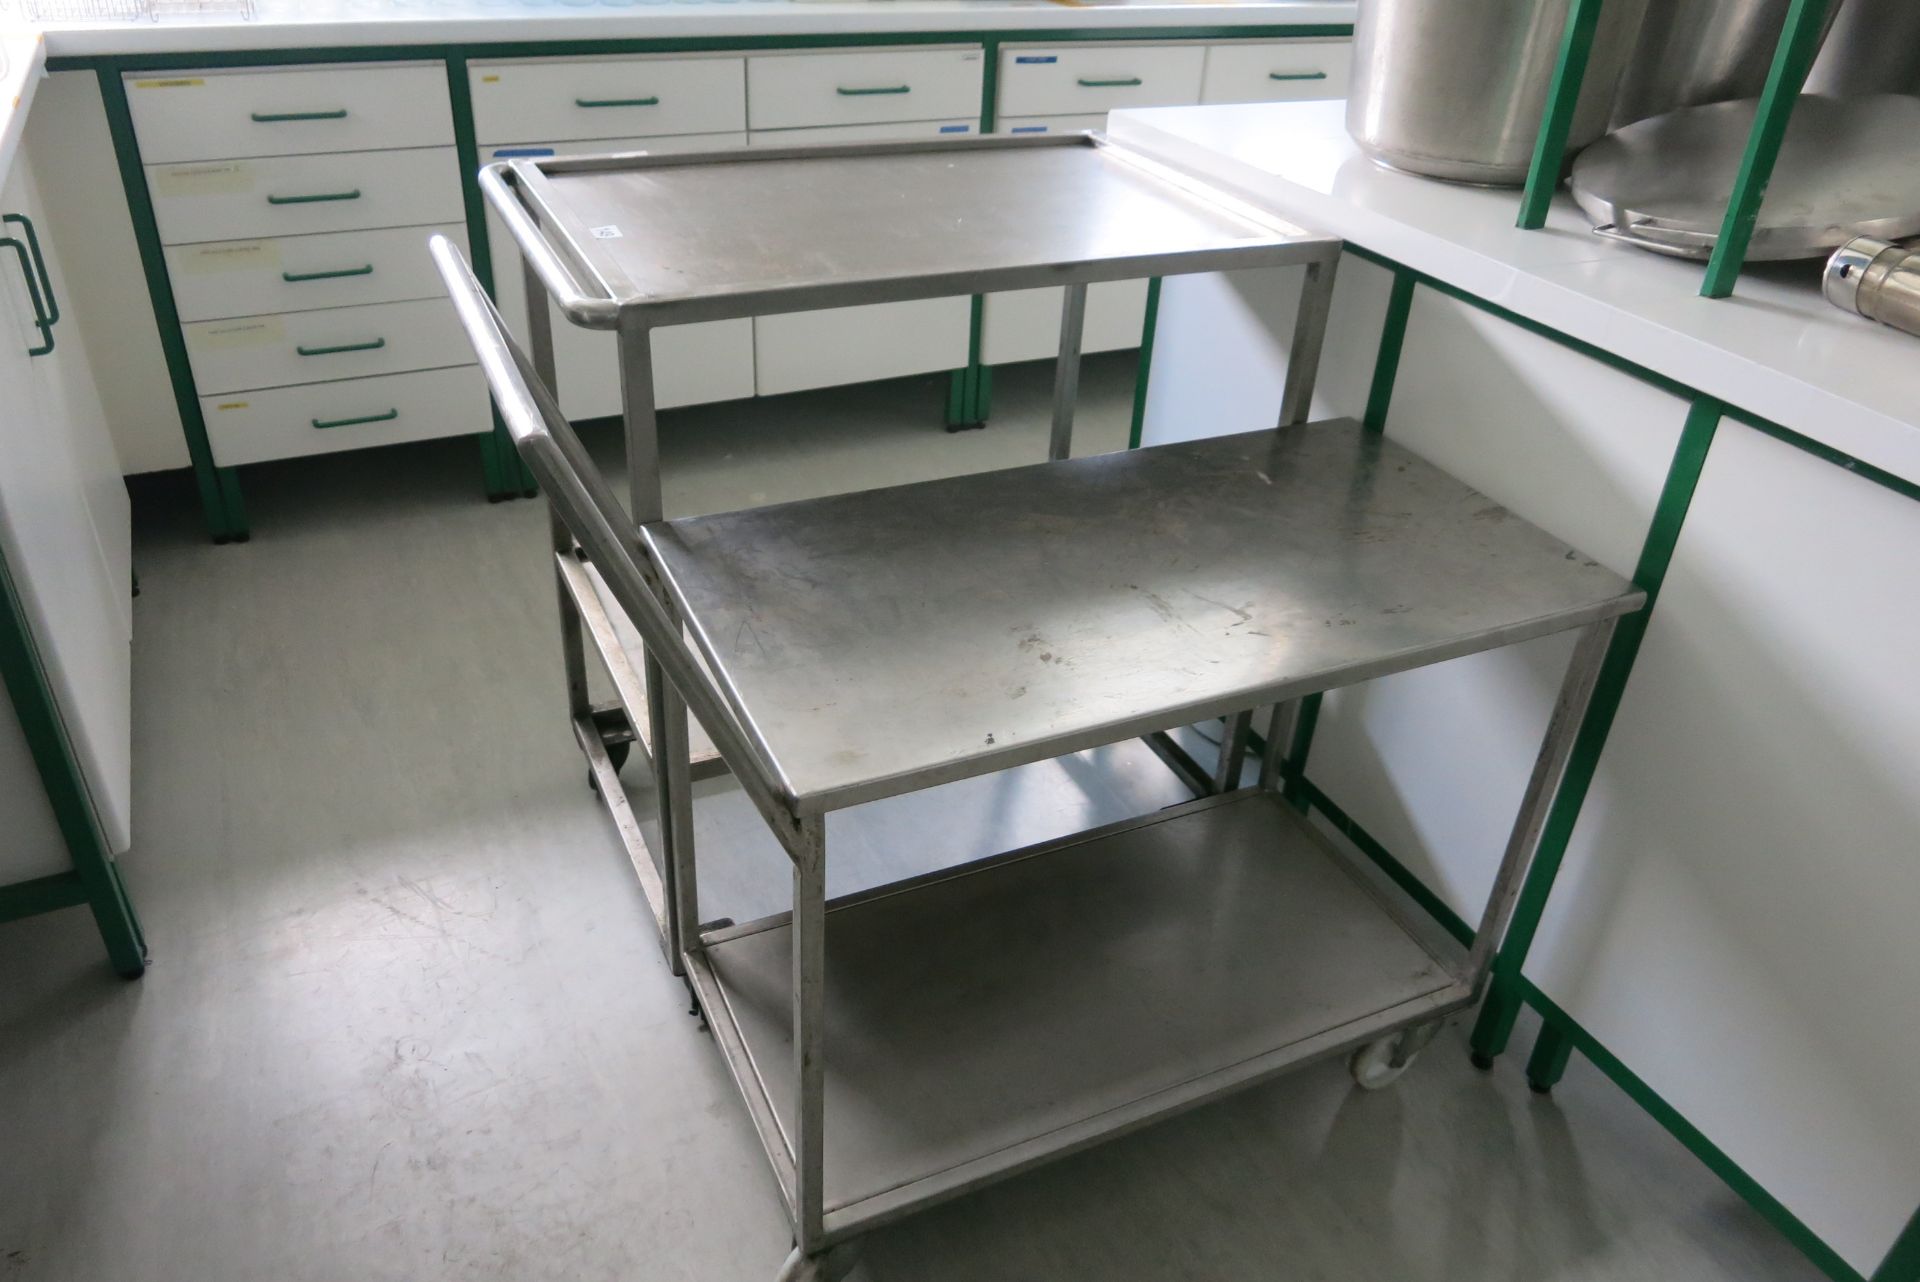 (2) Stainless carts